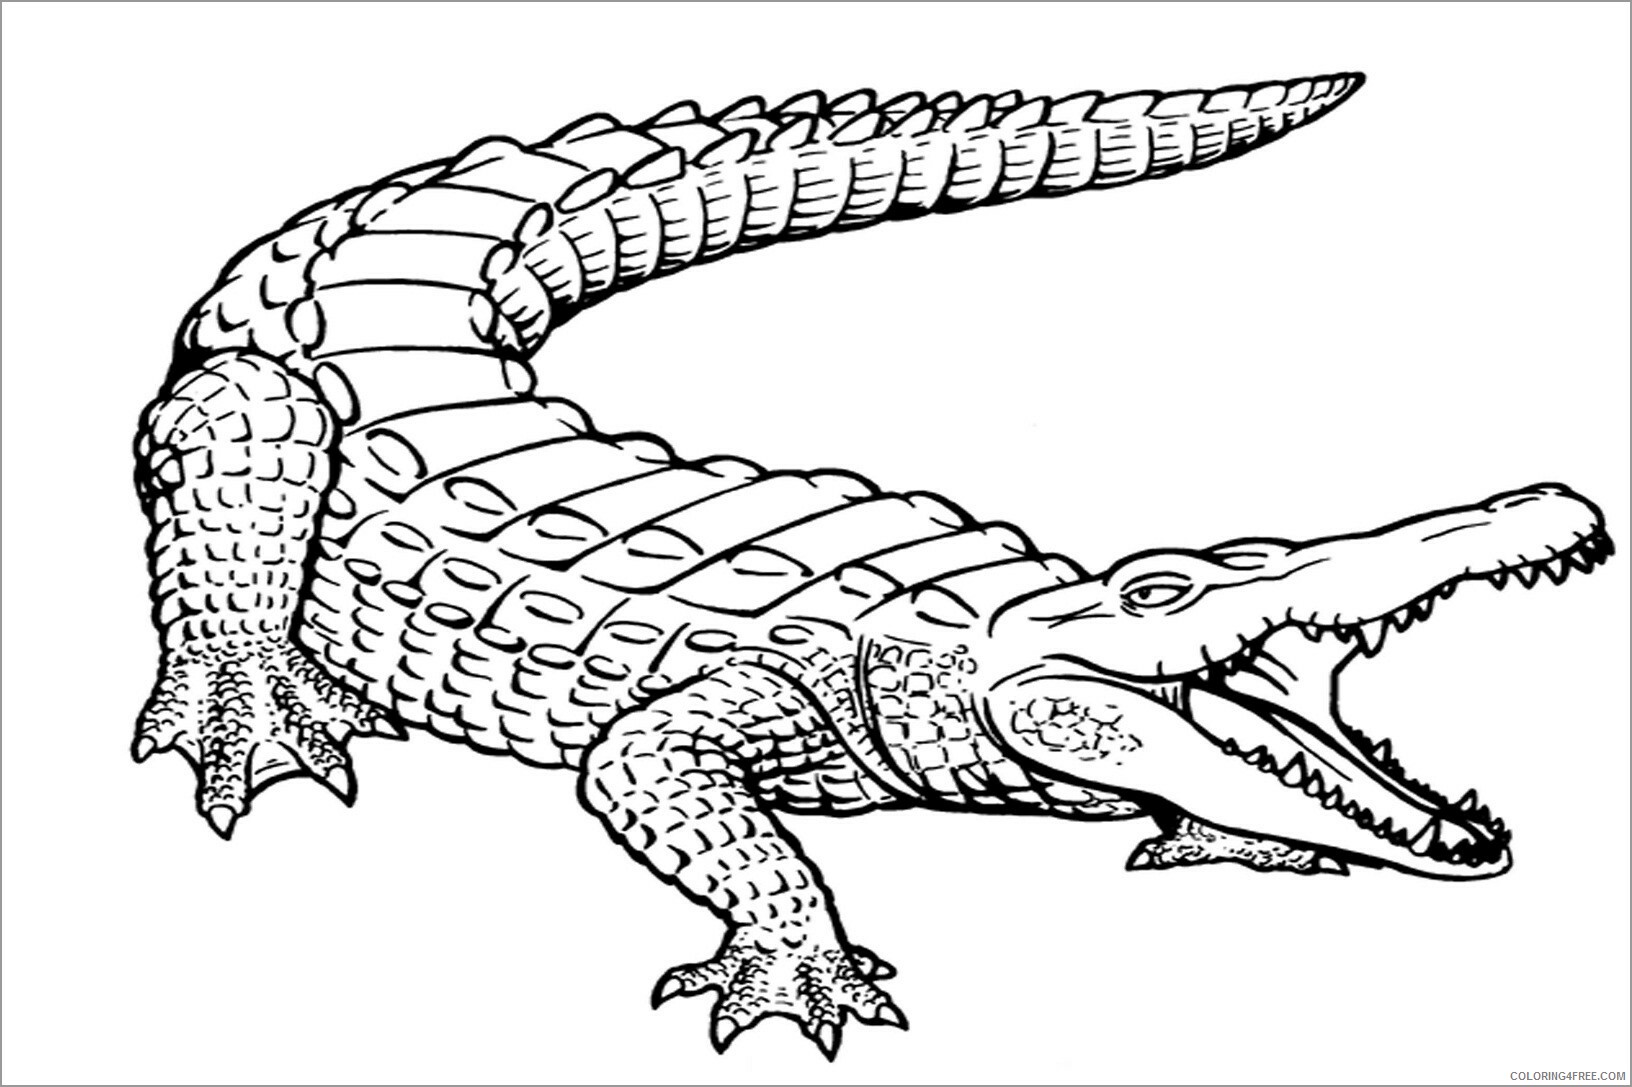 Alligator Coloring Pages Animal Printable Sheets Realistic Alligators 2021 0071 Coloring4free Coloring4free Com - alligator tail roblox